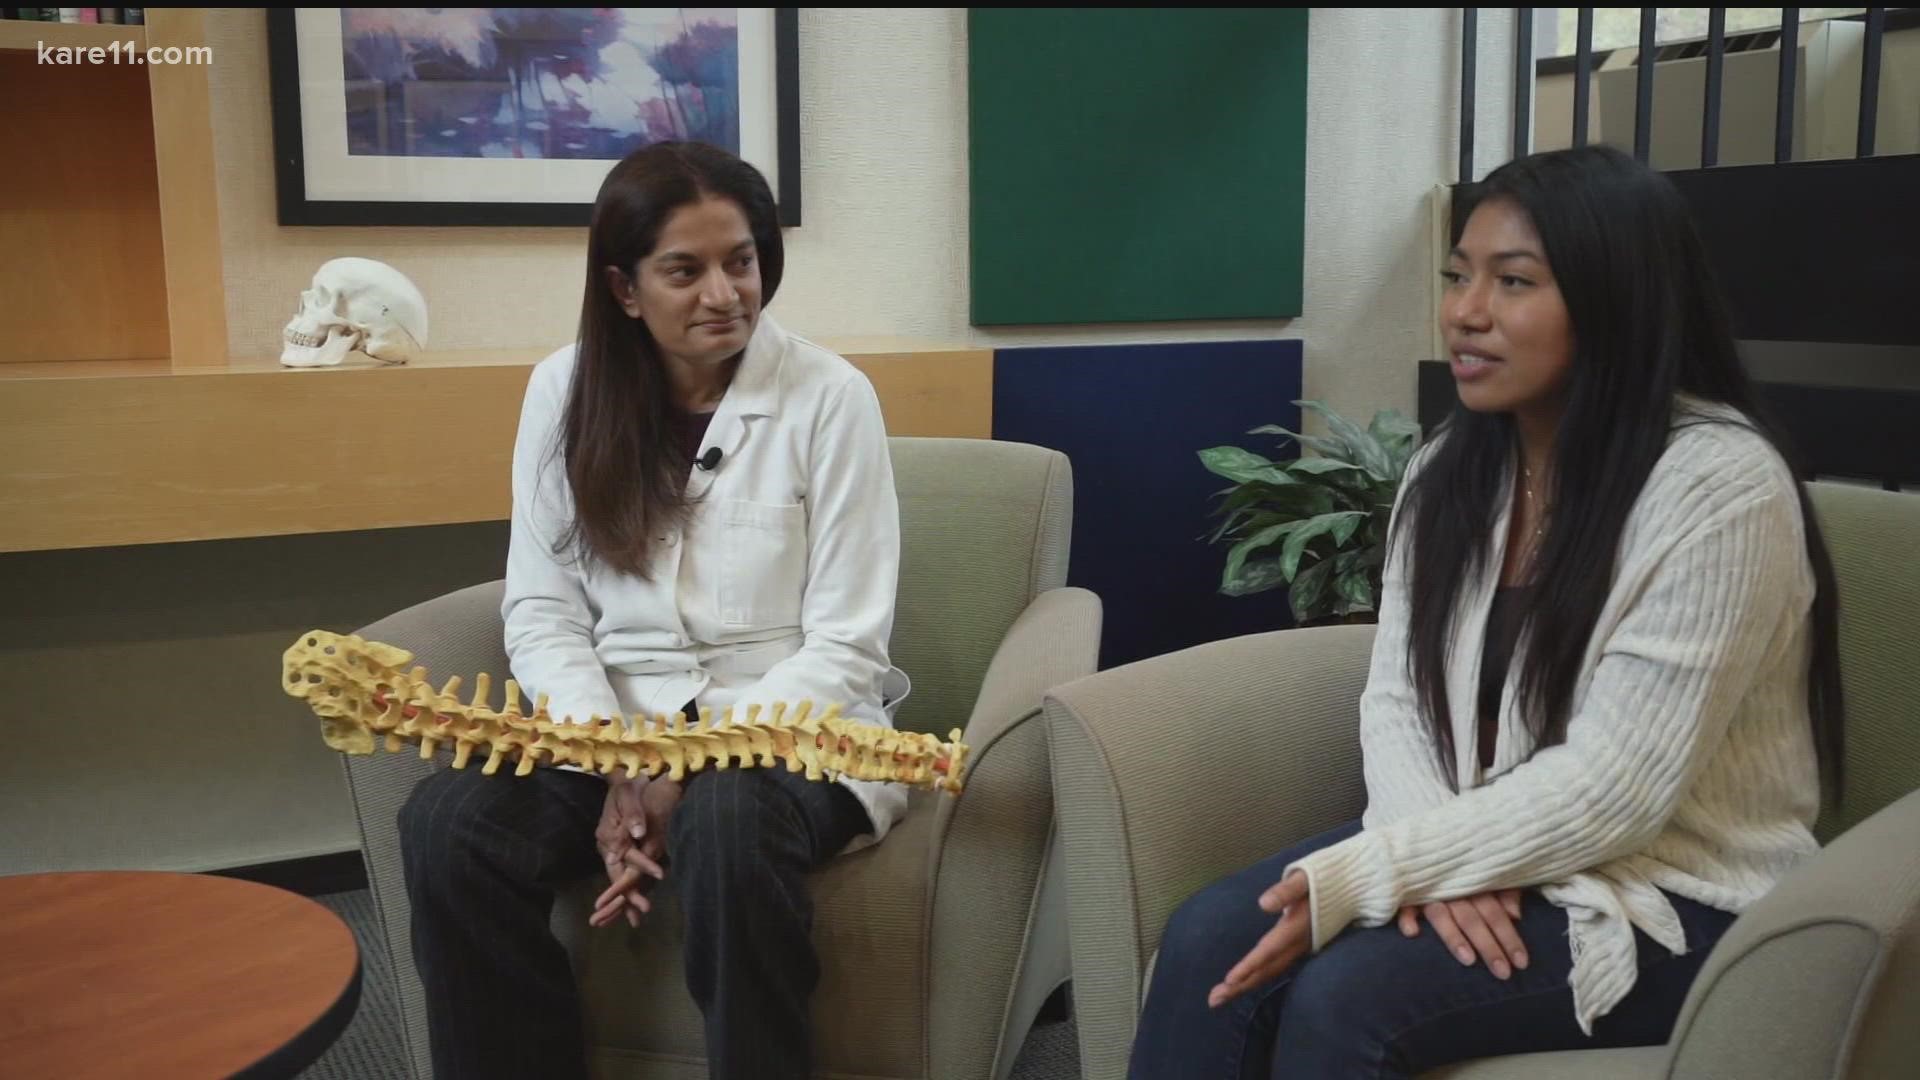 Lupe Galeno Rodriguez was reunited with Dr. Uzma Samadani, five years after the neurosurgeon performed life-changing surgery to remove tumors from Rodriguez's spine.